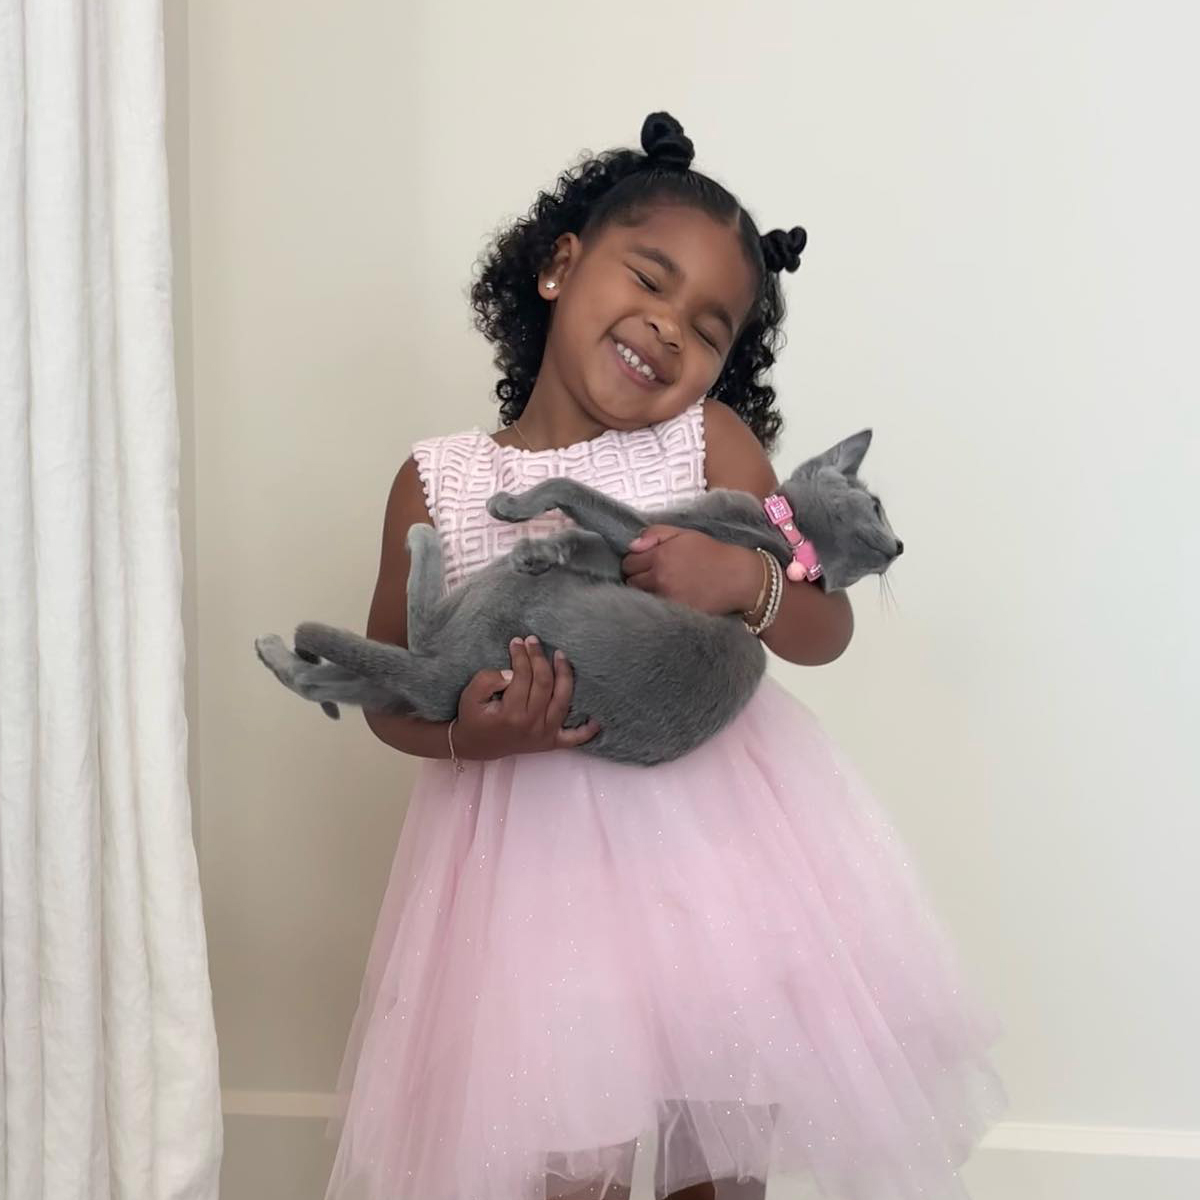 Khloé Kardashian's Daughter True Models All Pink Outfit: Photos